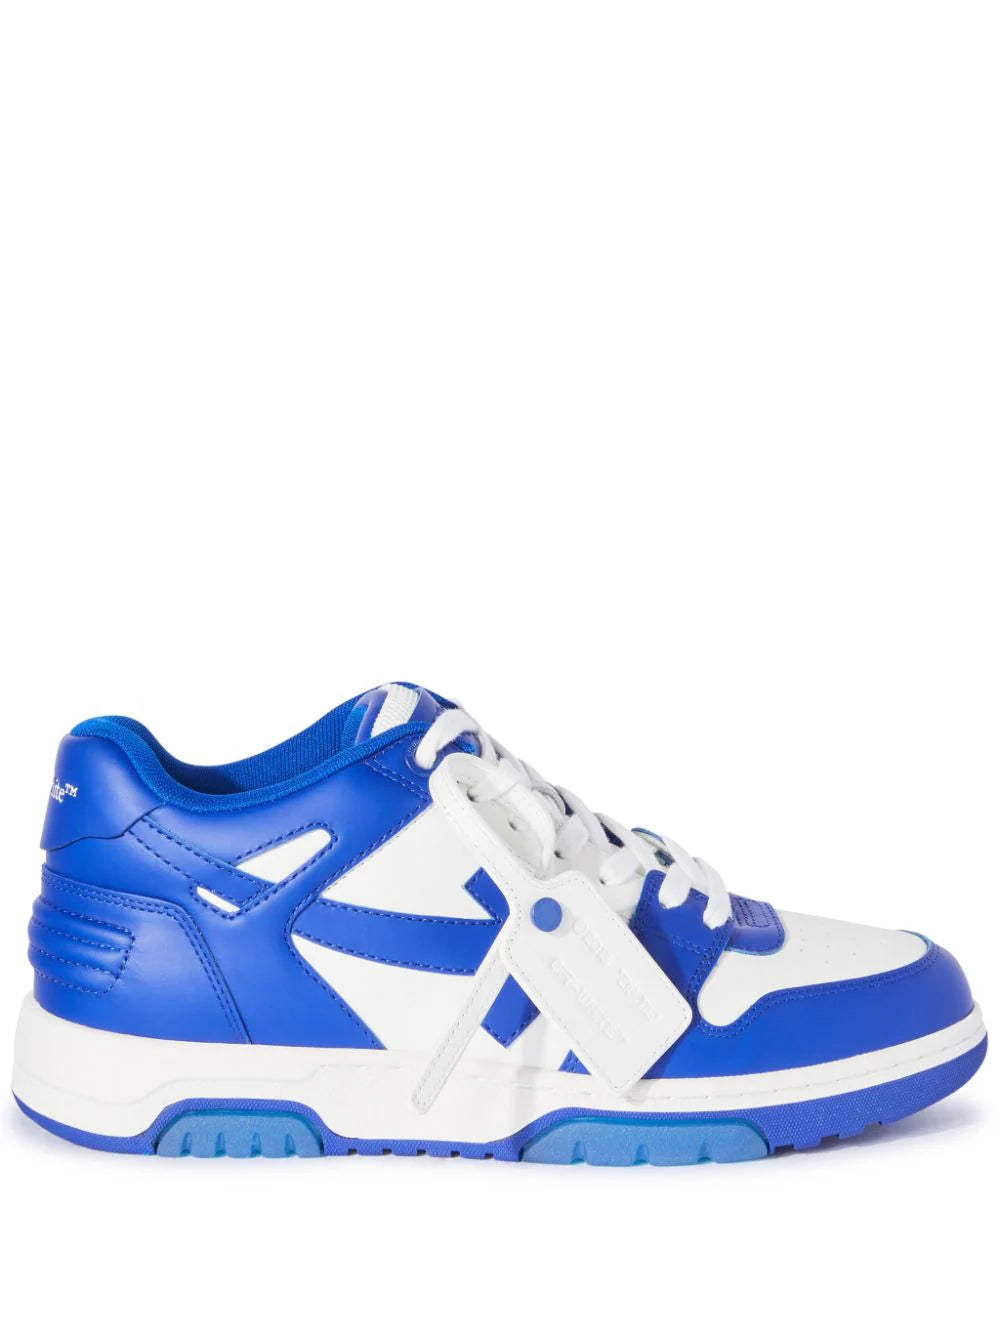 OFF-WHITE MEN Out Of Office Low Top Leather Sneakers White/Blue - MAISONDEFASHION.COM